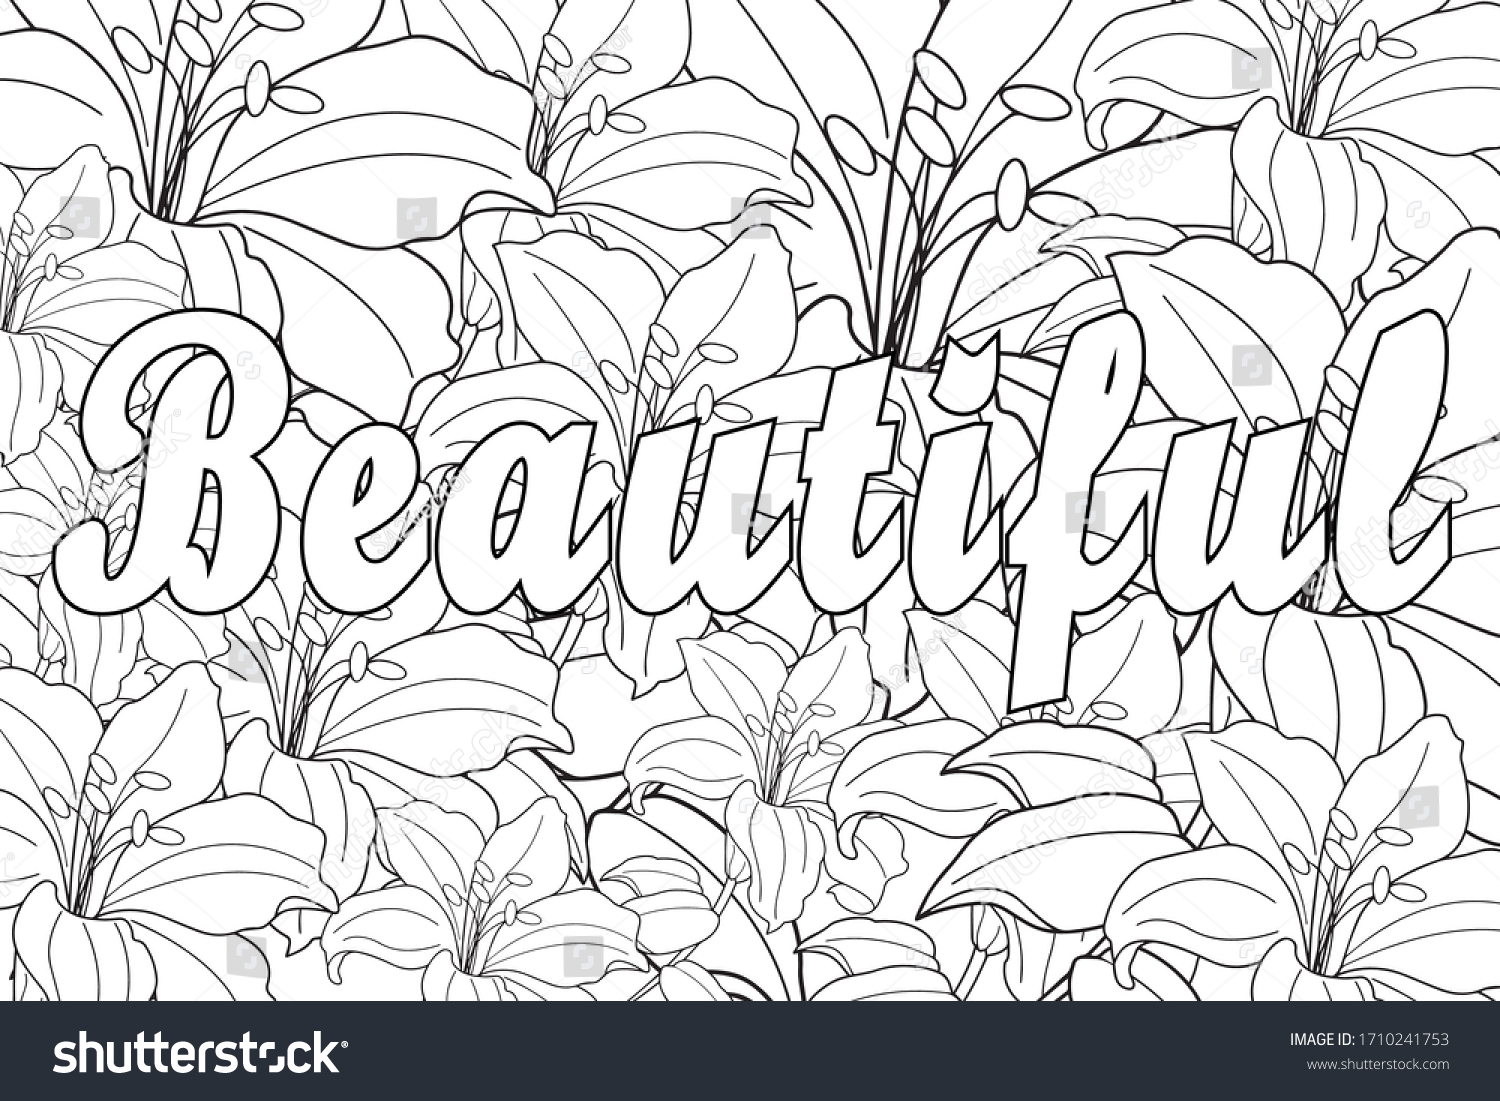 Beautiful coloring pages beautiful flower coloring stock vector royalty free